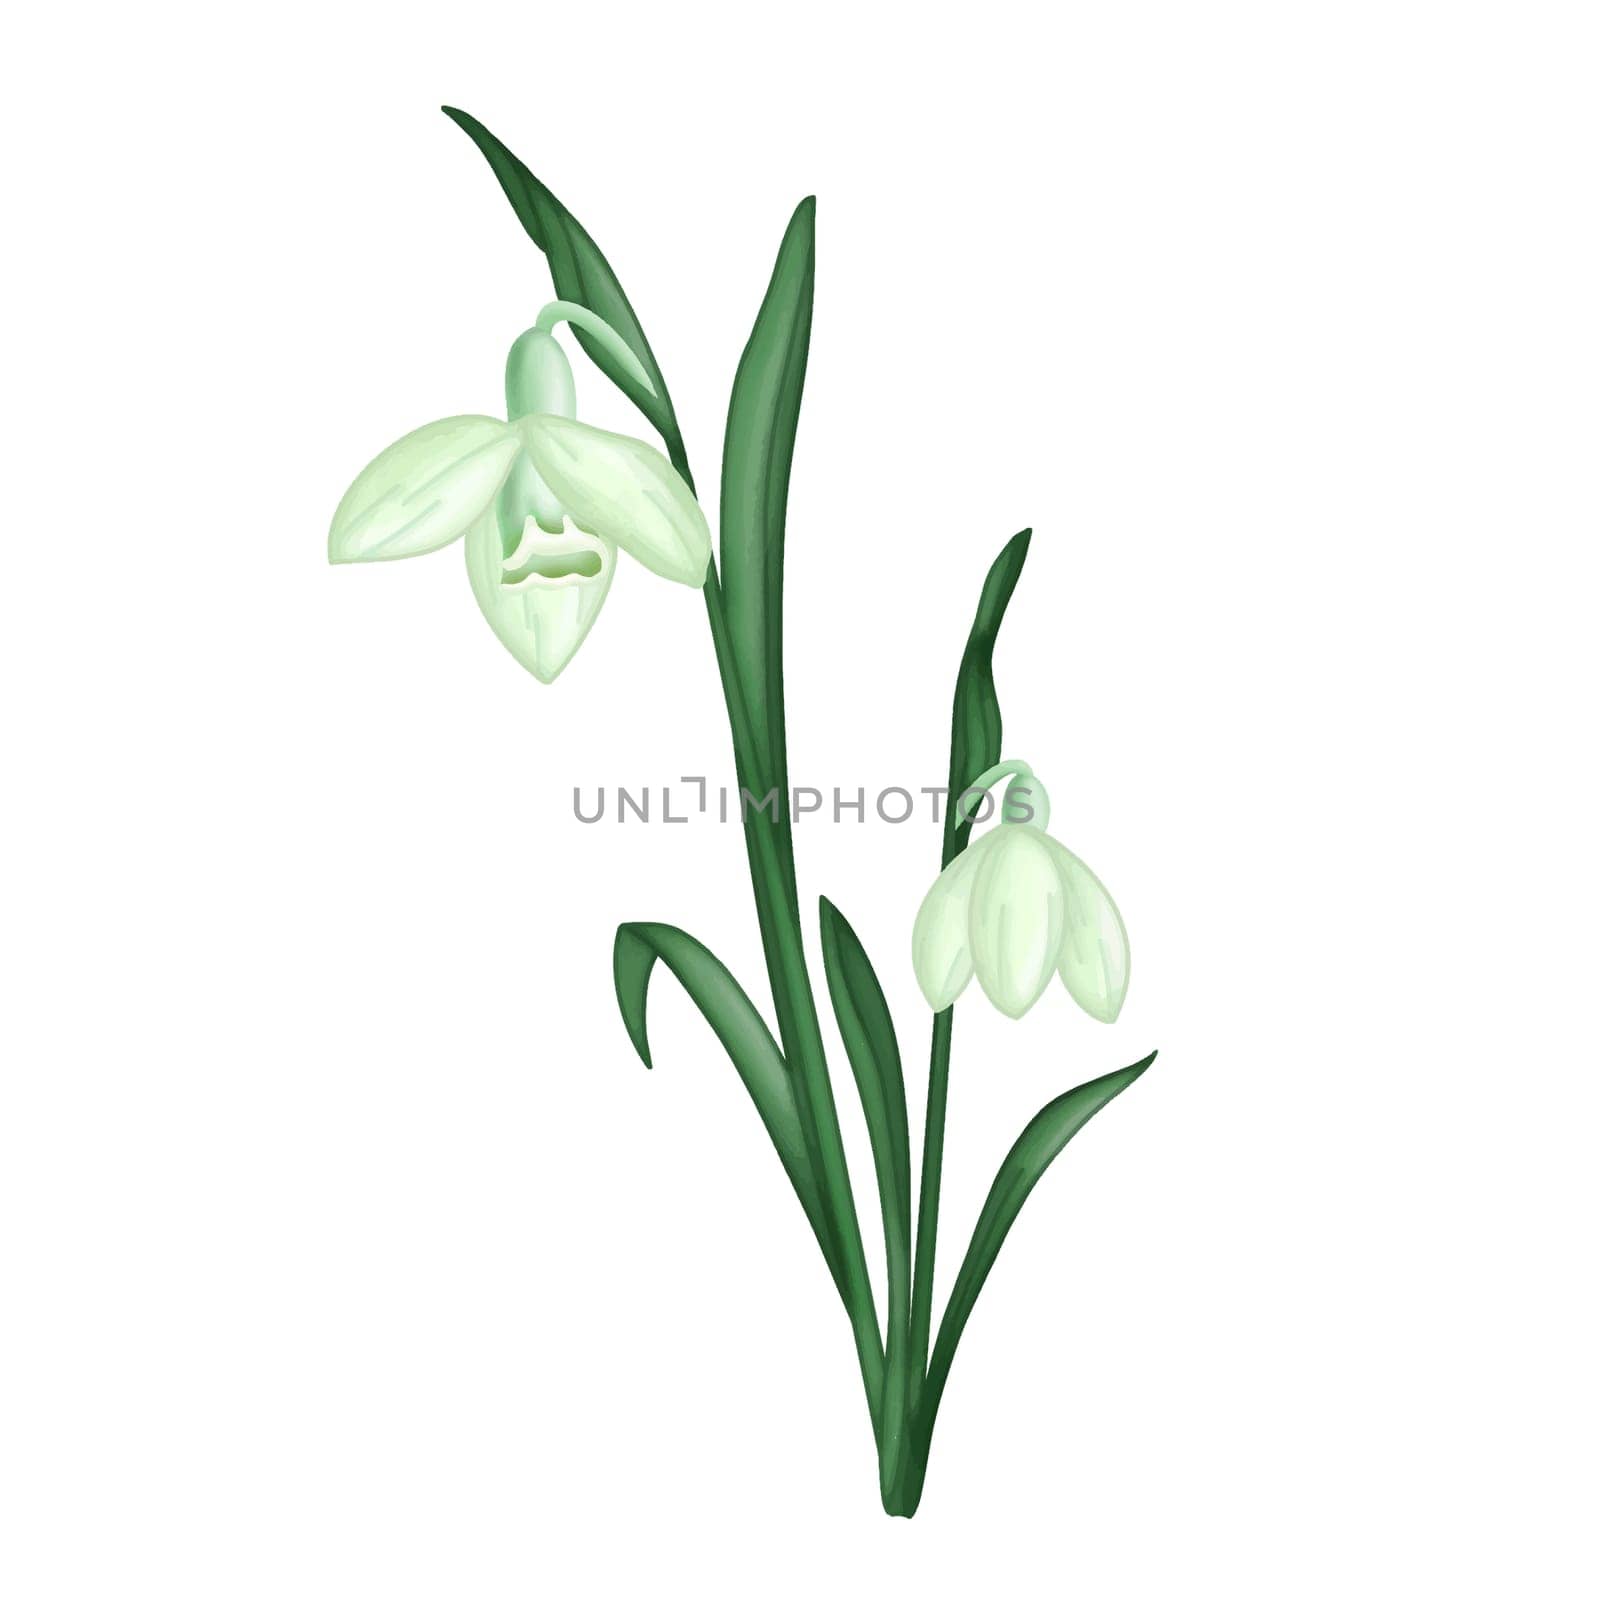 Snowdrop flower with green leaves clipart. Winter flower design element isolated on white background. by Skyecreativestudio